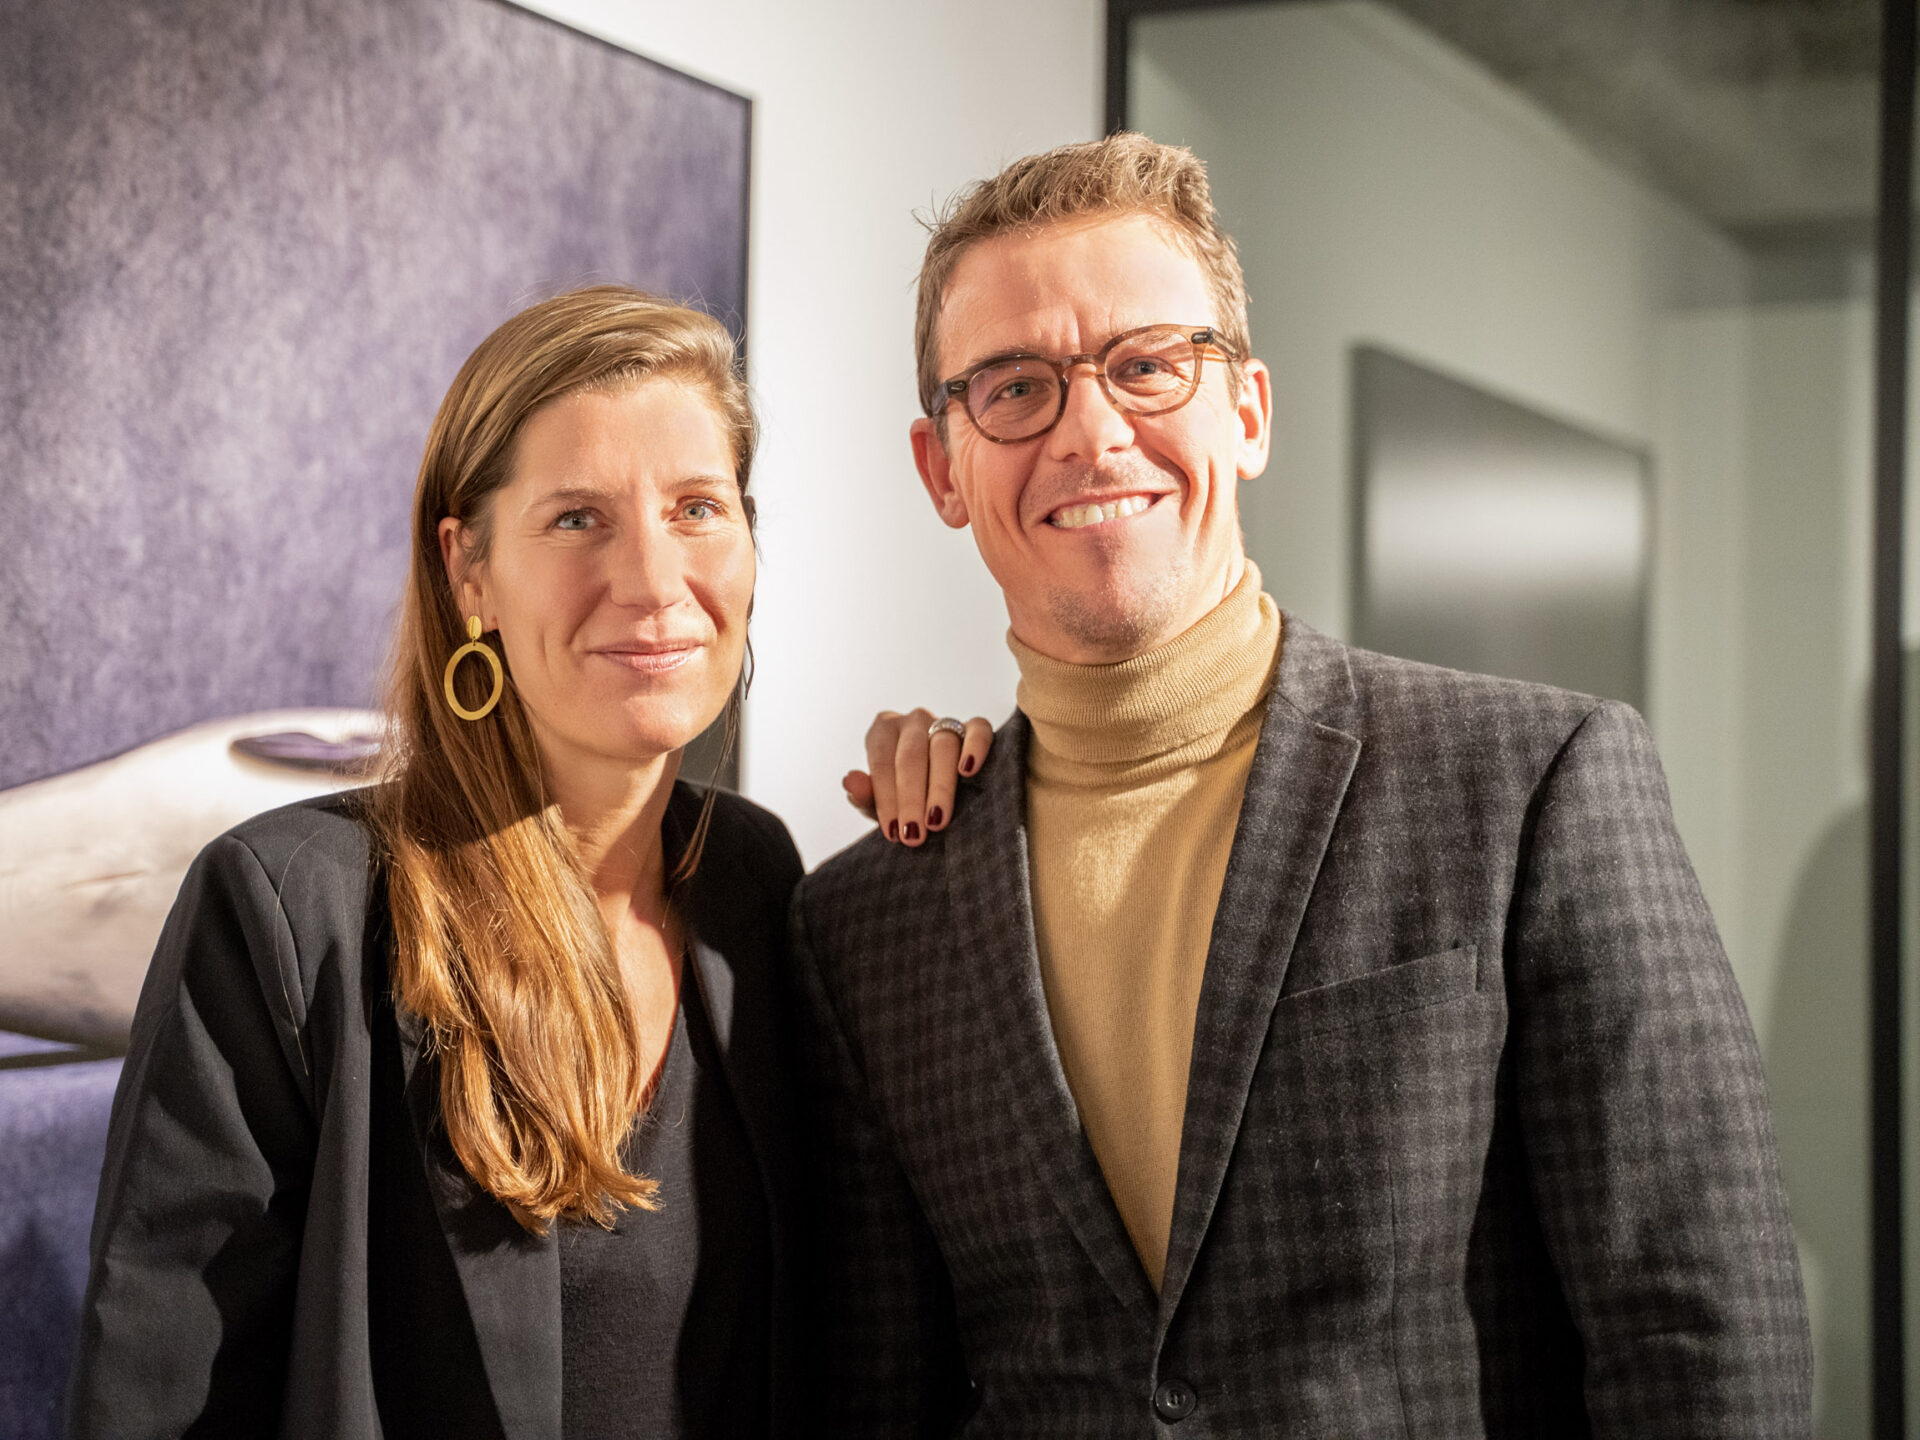 Belgium Sothebys Int. Realty Panel discussion on photography – FR